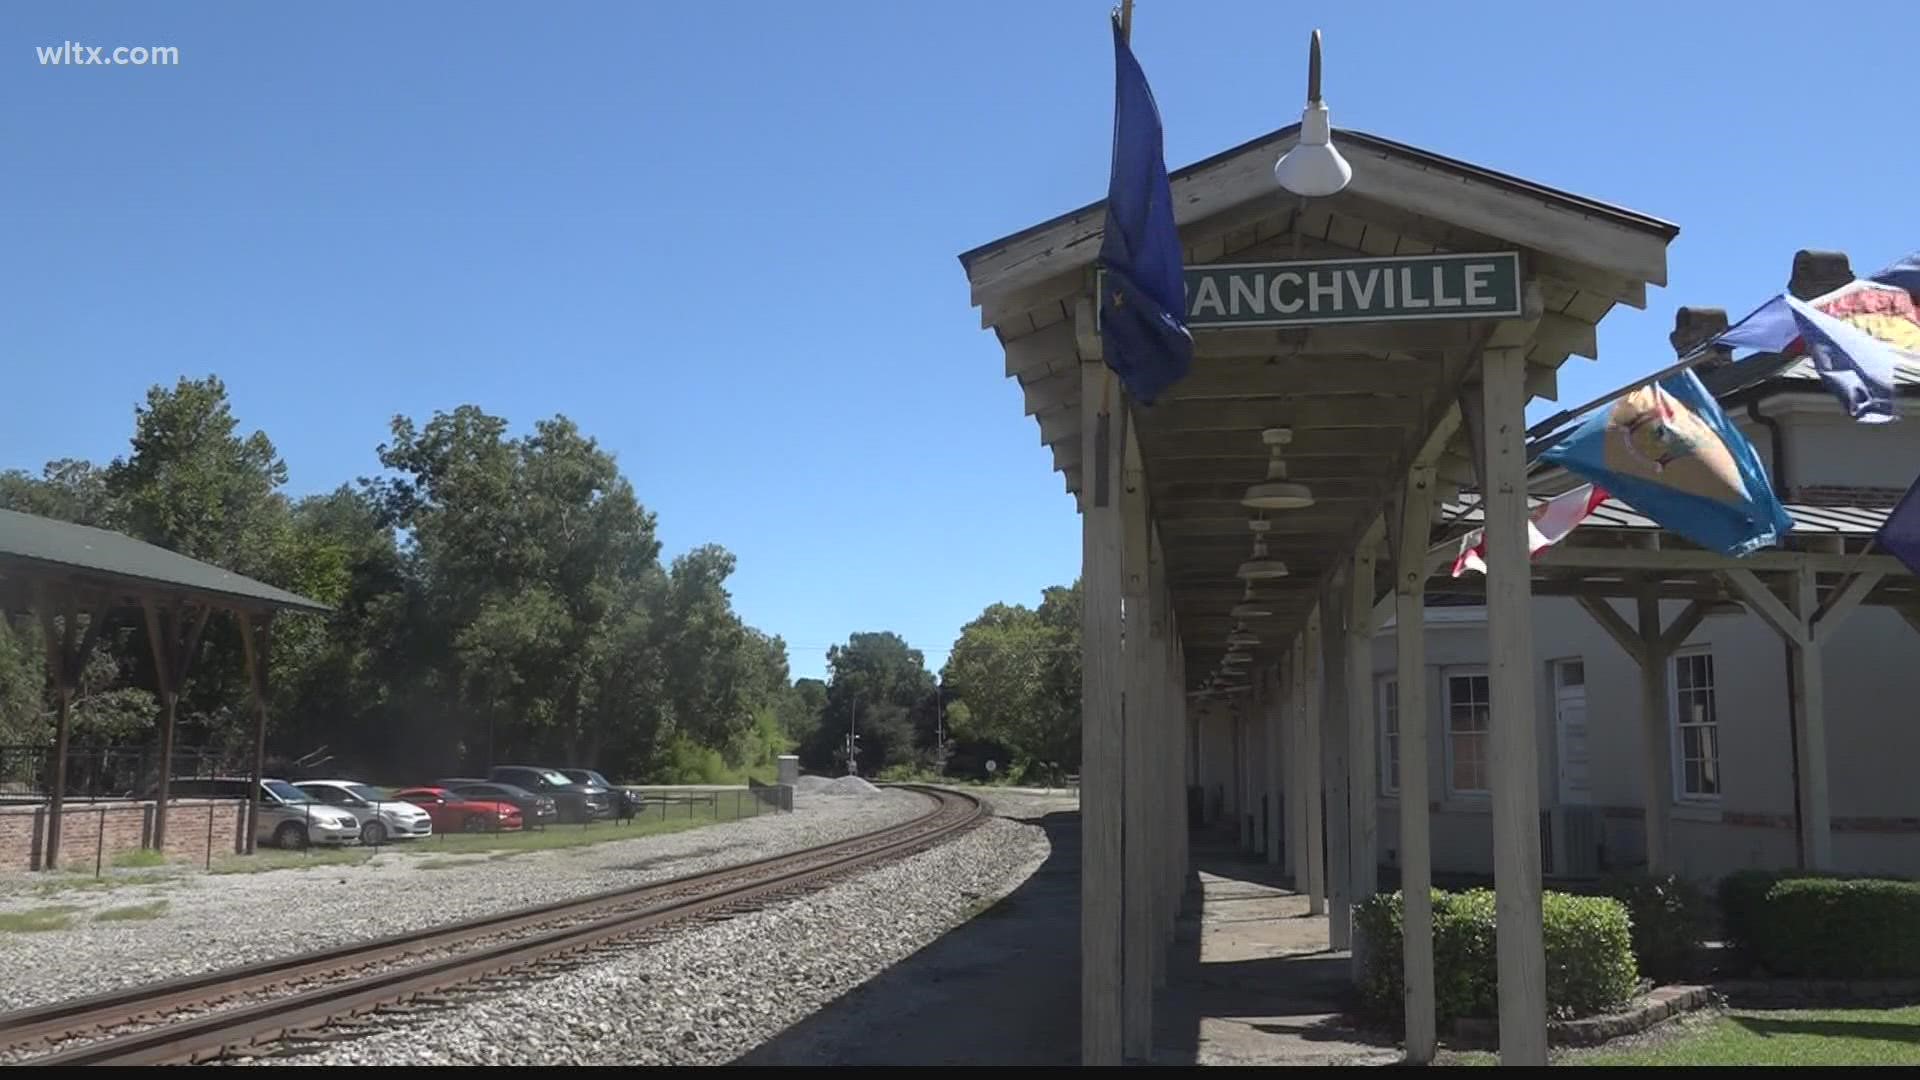 Local historians say this is how the town honors being home to the world's oldest railroad junction.